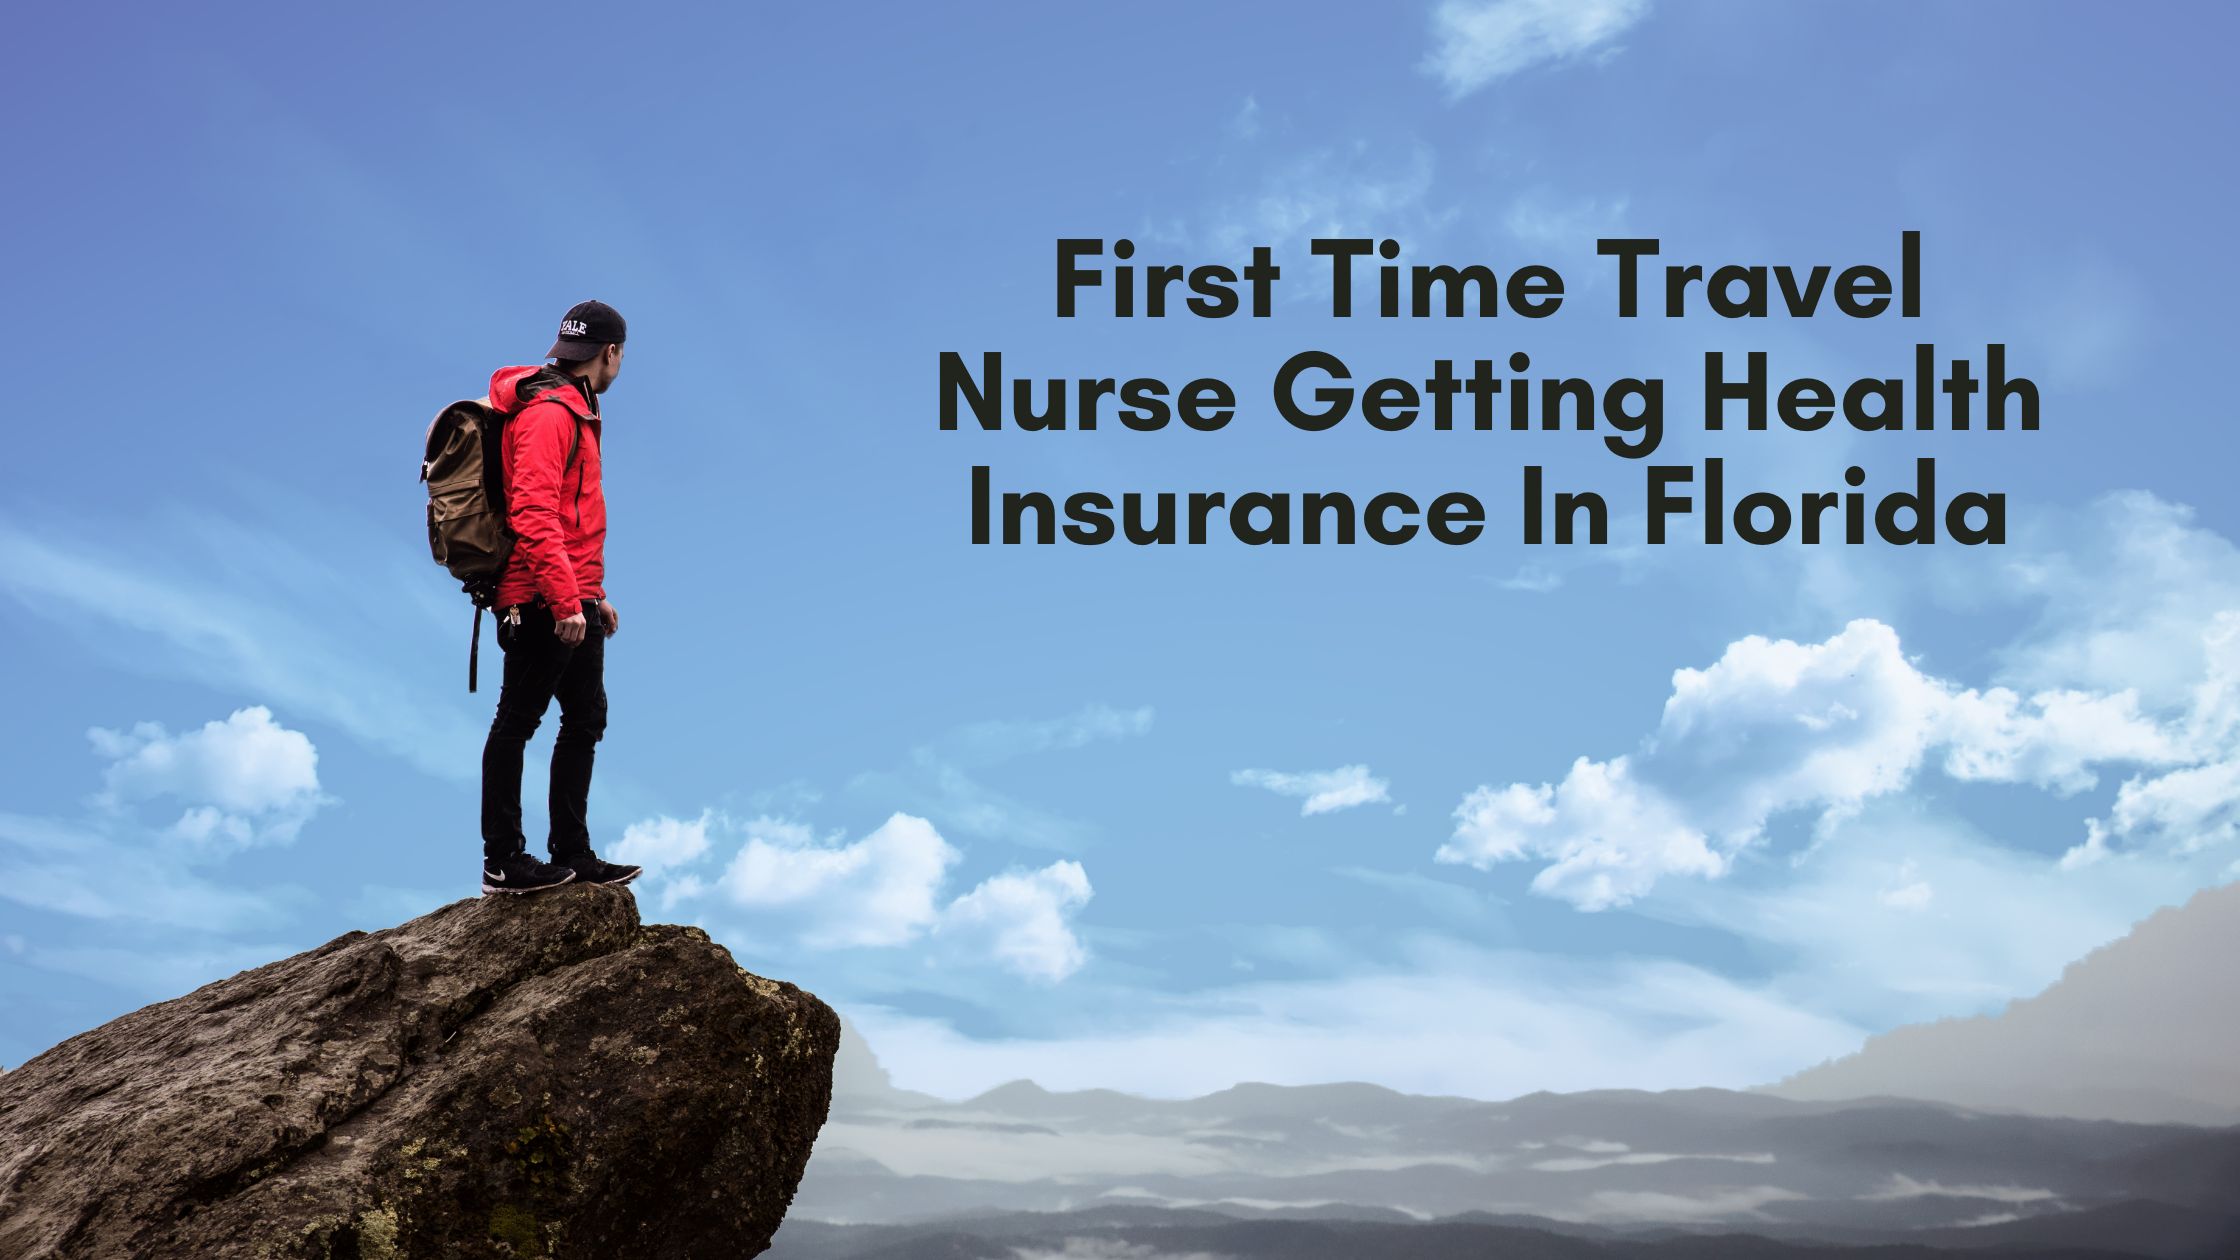 First Time Travel Nurse Getting Health Insurance In Florida